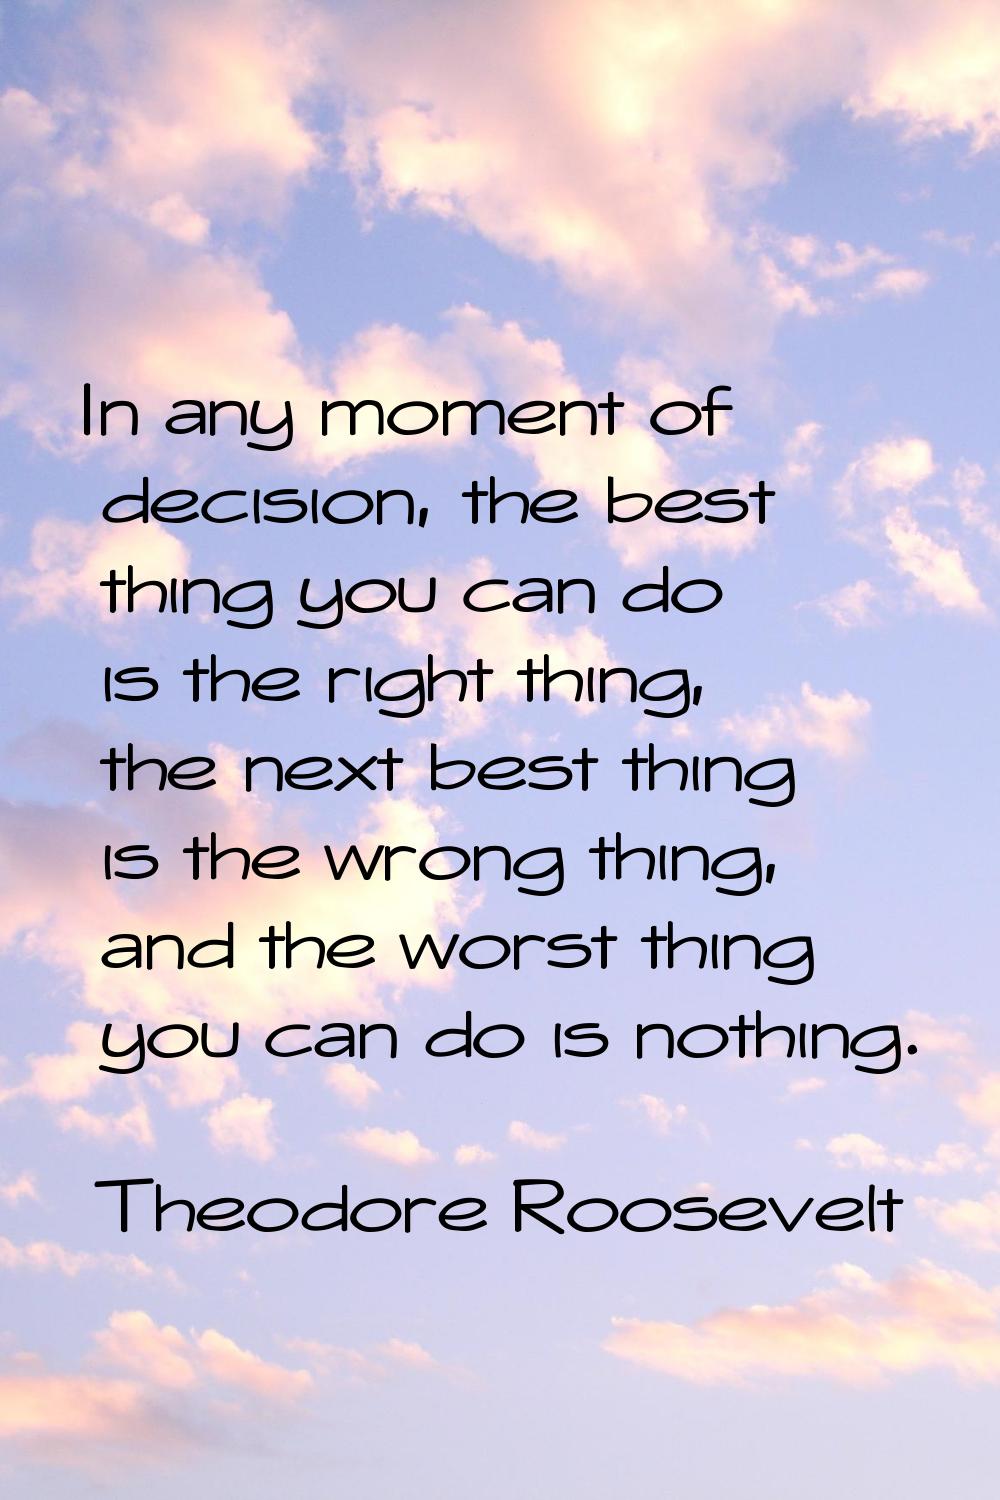 In any moment of decision, the best thing you can do is the right thing, the next best thing is the